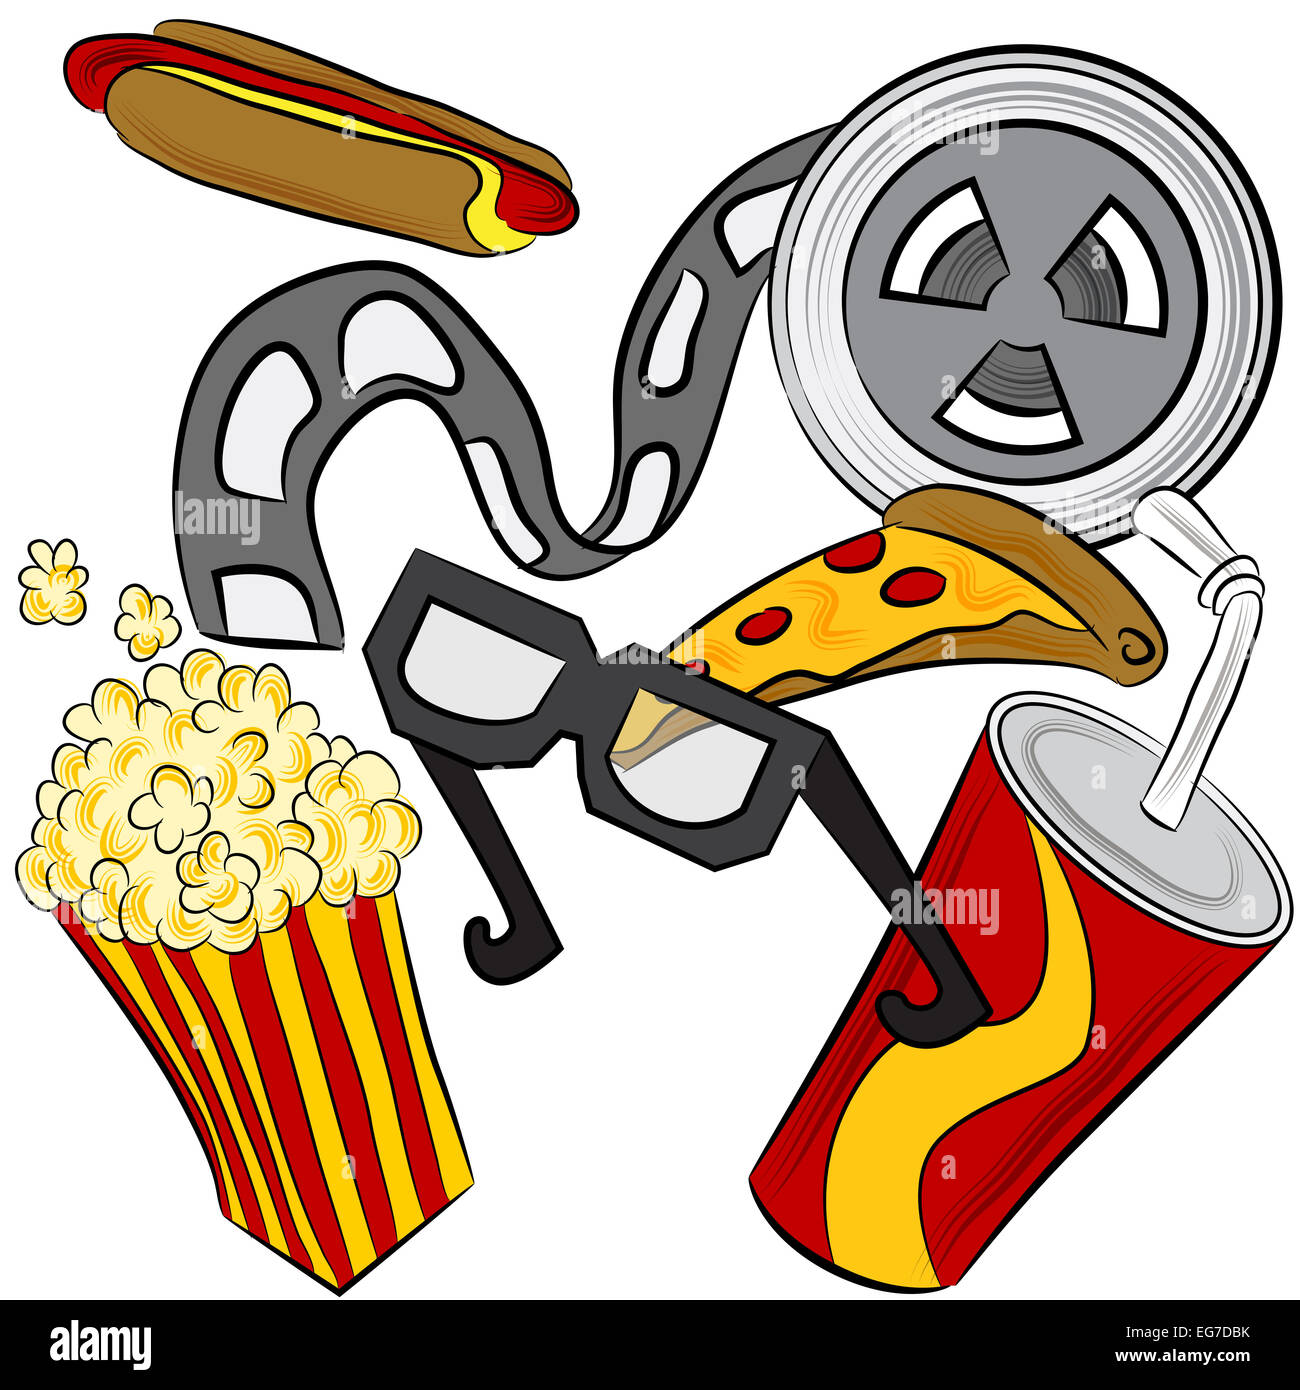 An image of a film reel, 3d glasses and movie theater food. Stock Photo